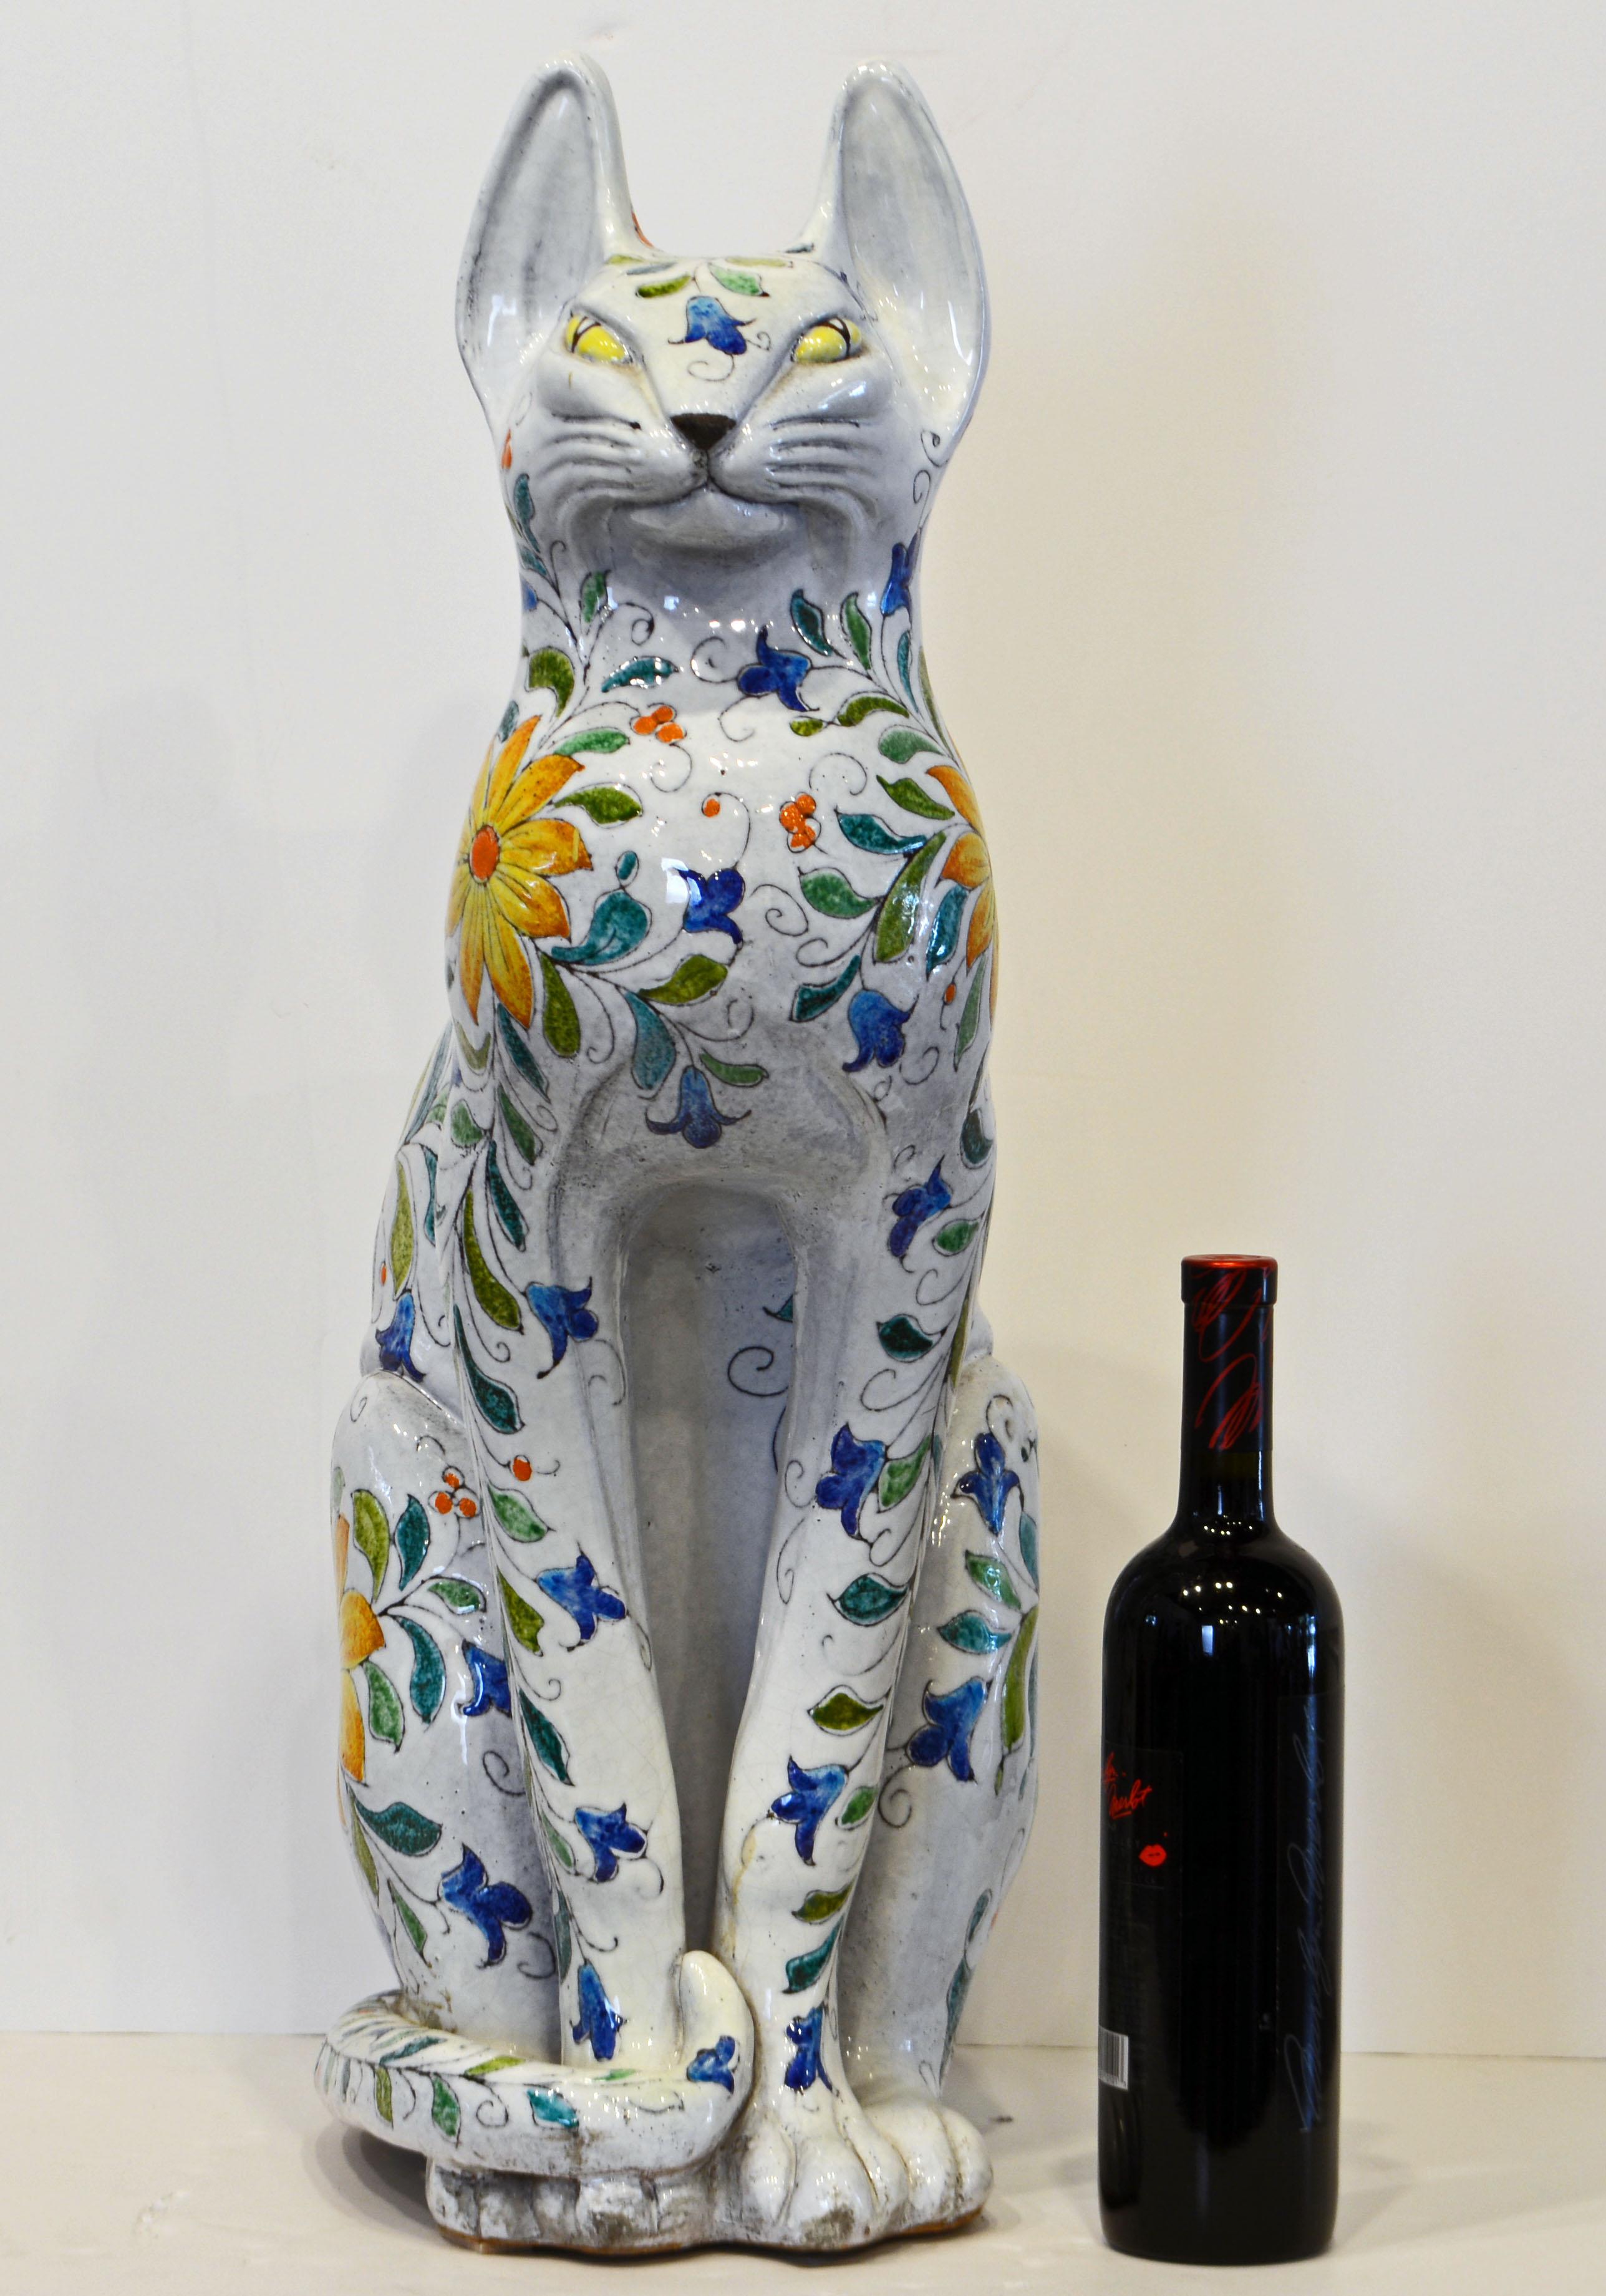 Standing 27 inches tall this Italian Egyptian inspired terracotta statue of a beautifully glazed and decorated cat is a feast for the eyes. It dates to the late 20th century and is a fine representative of the centuries old Italian majolica